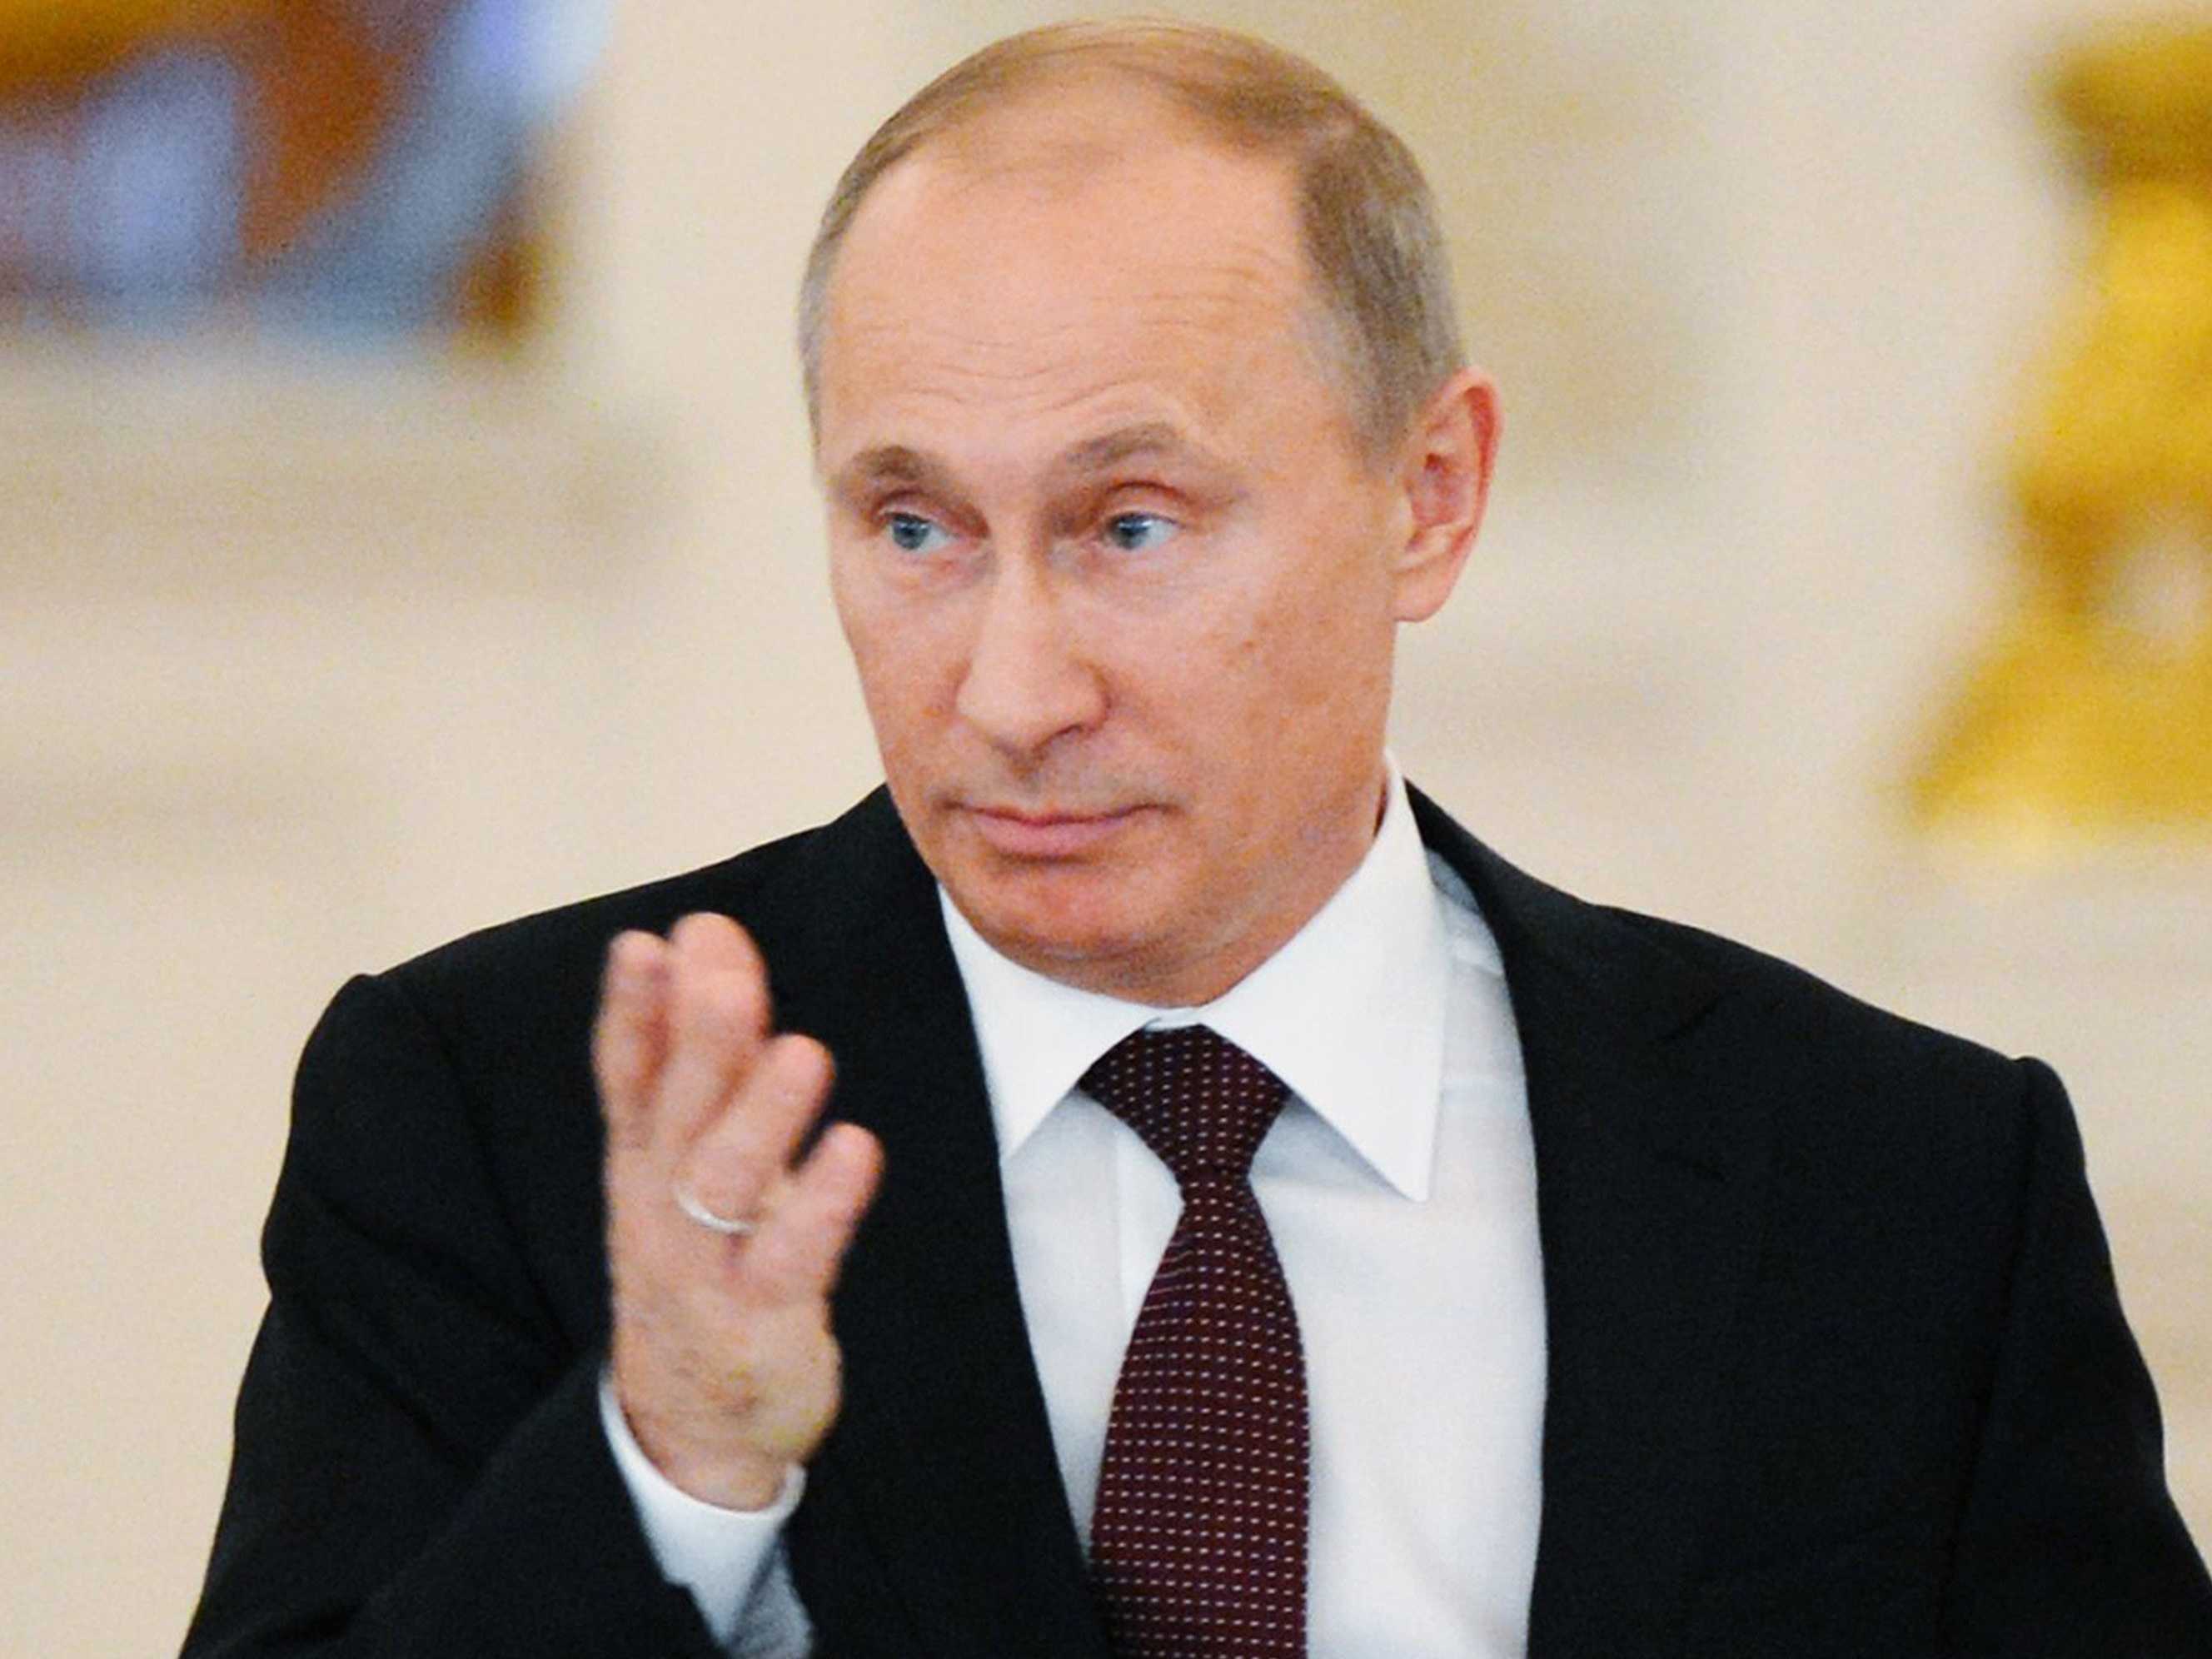 Putin Amends Law to Grant Citizenship for Russian Speakers in ’Soviet Union’